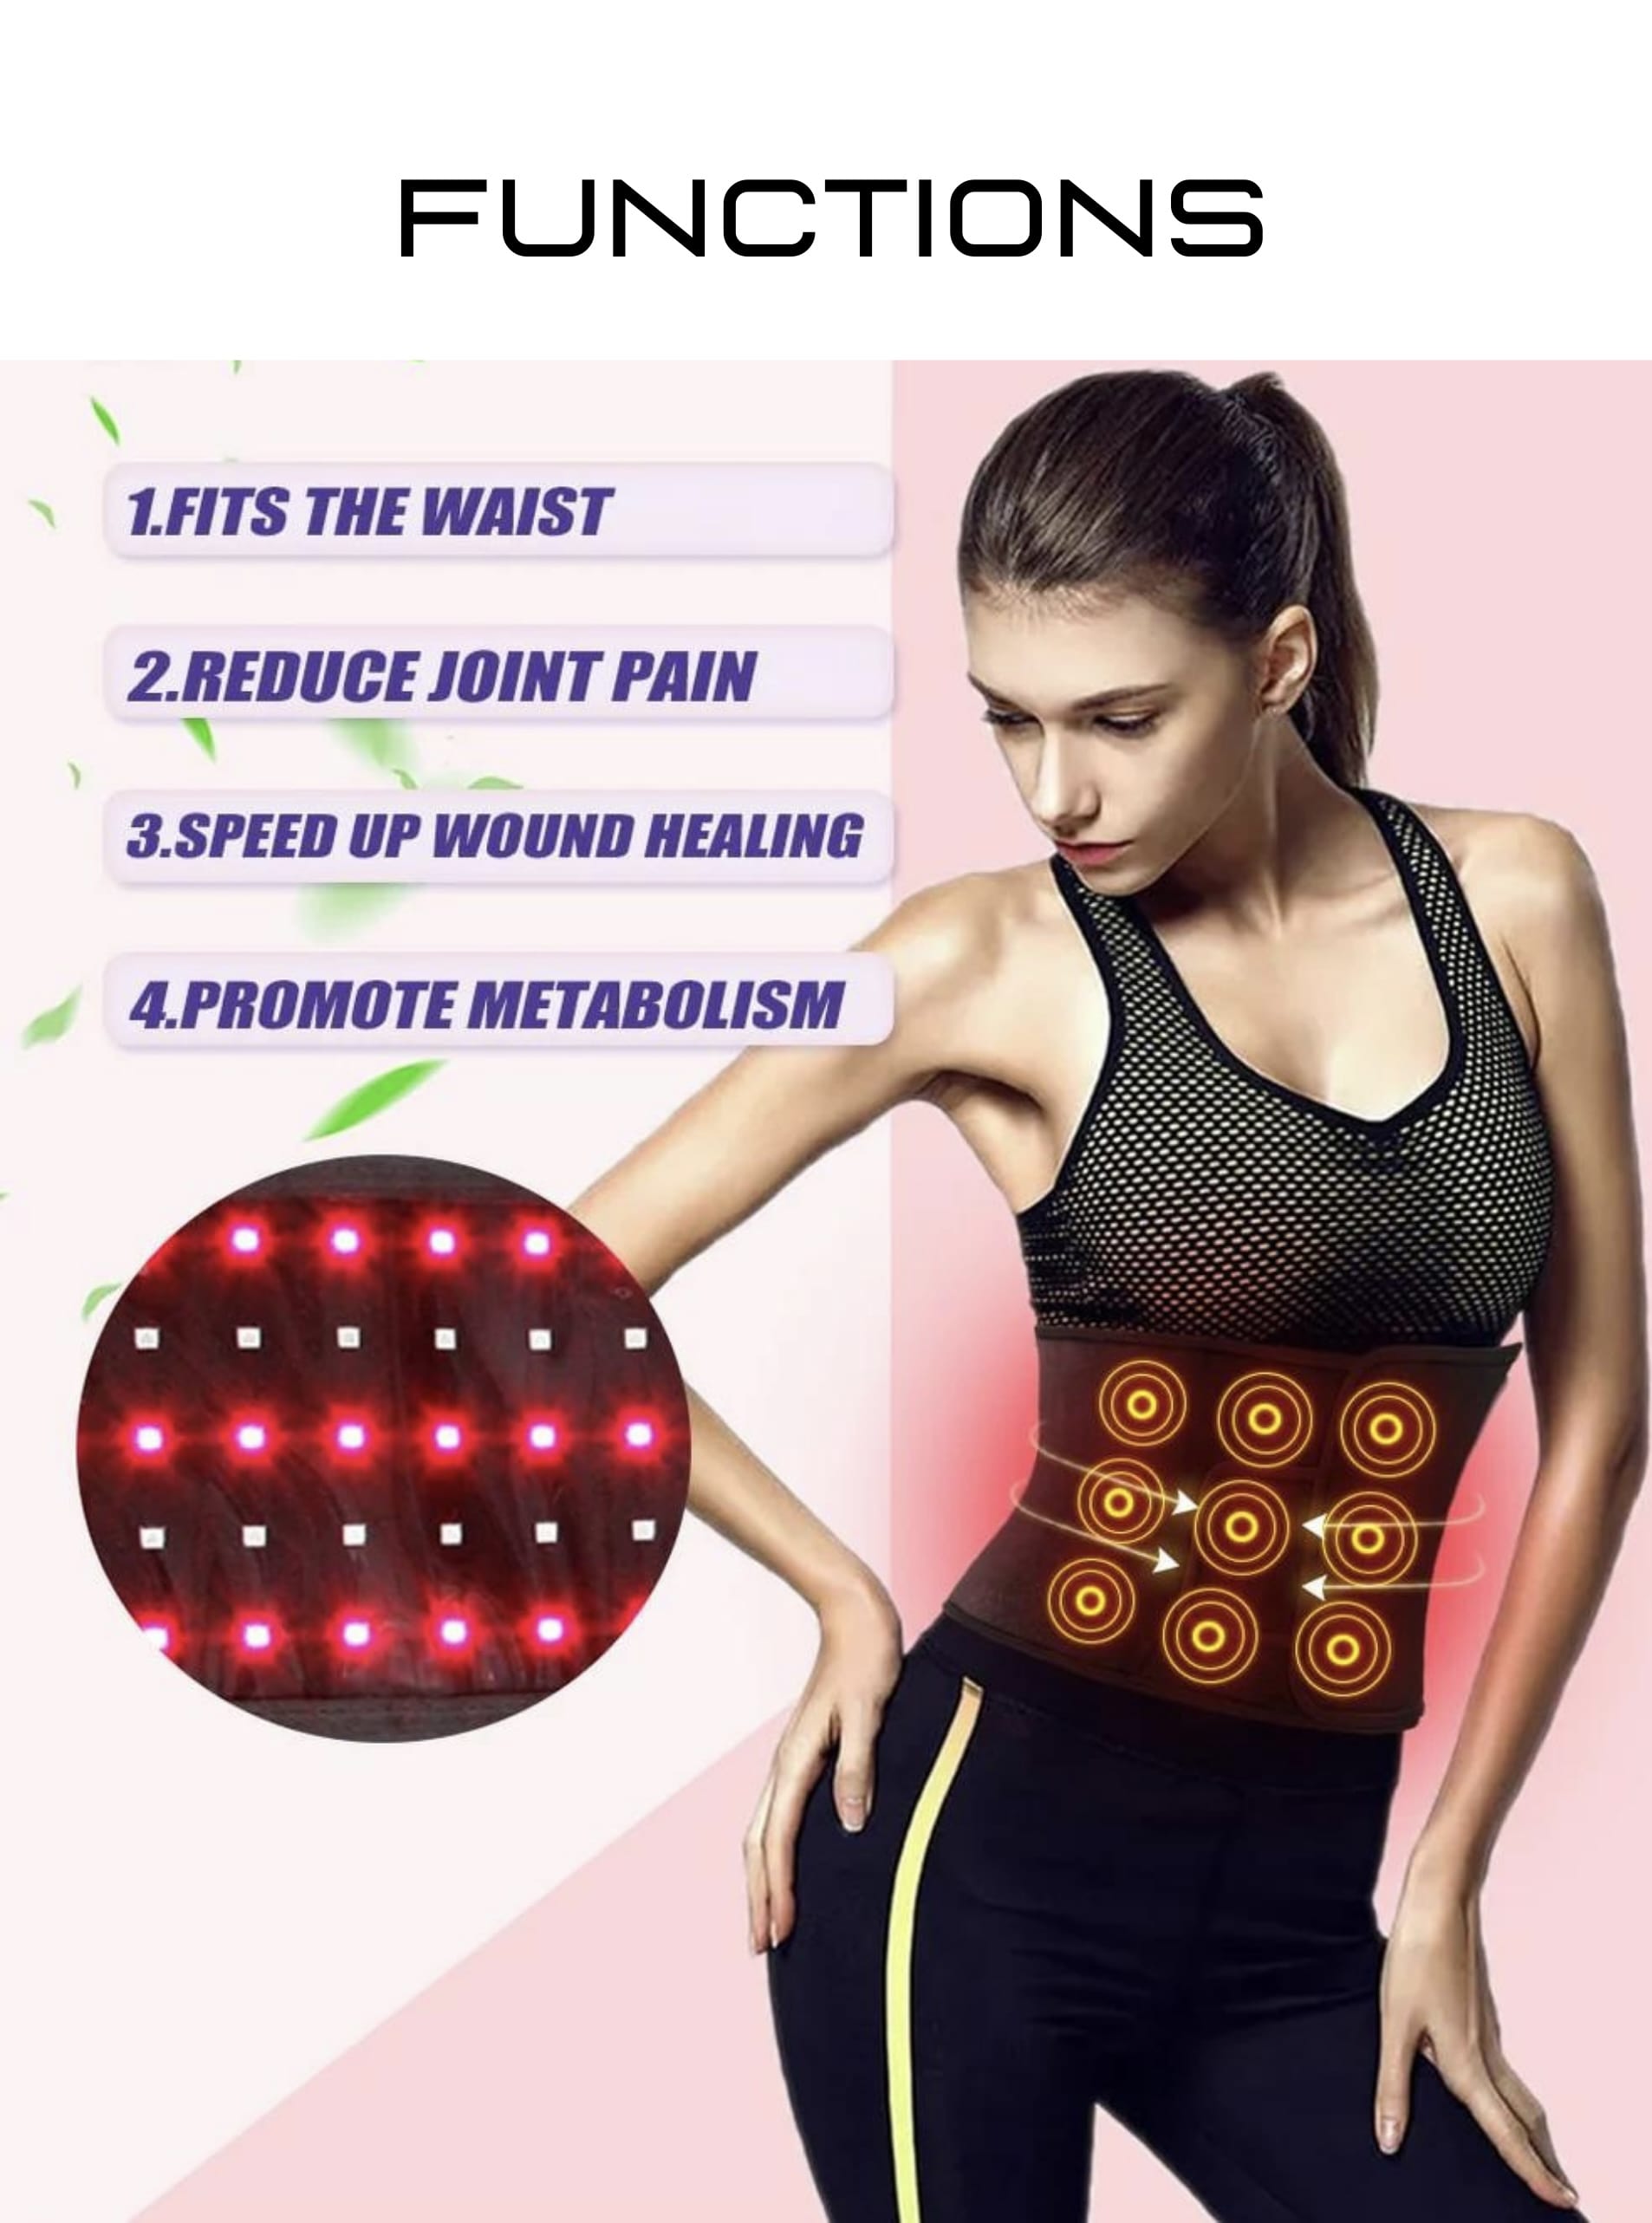 girdle back pain - Buy girdle back pain at Best Price in Malaysia